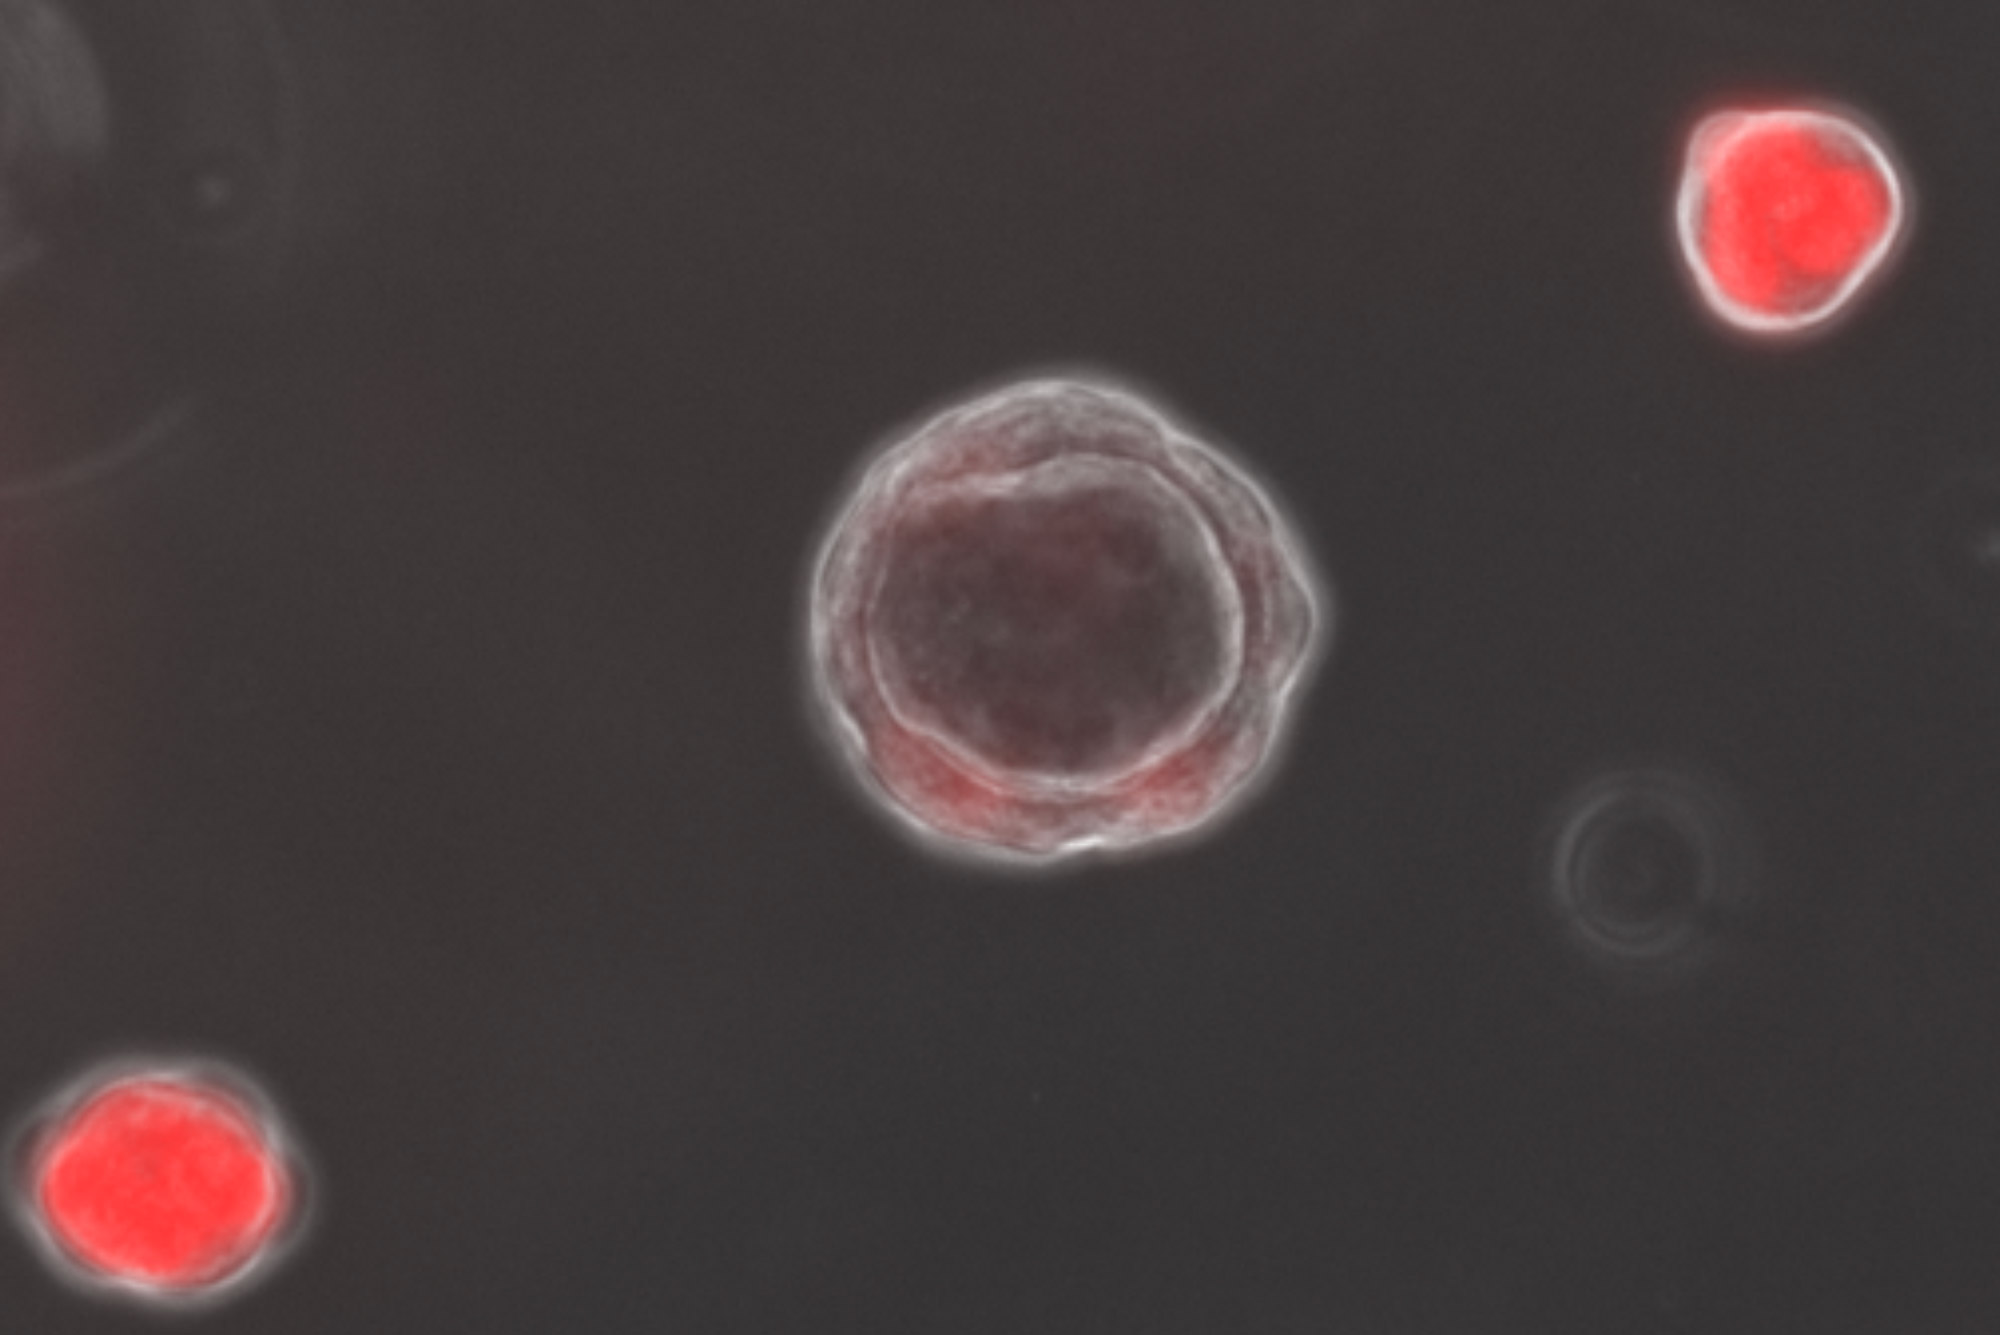 An image of red organoids on a gray background